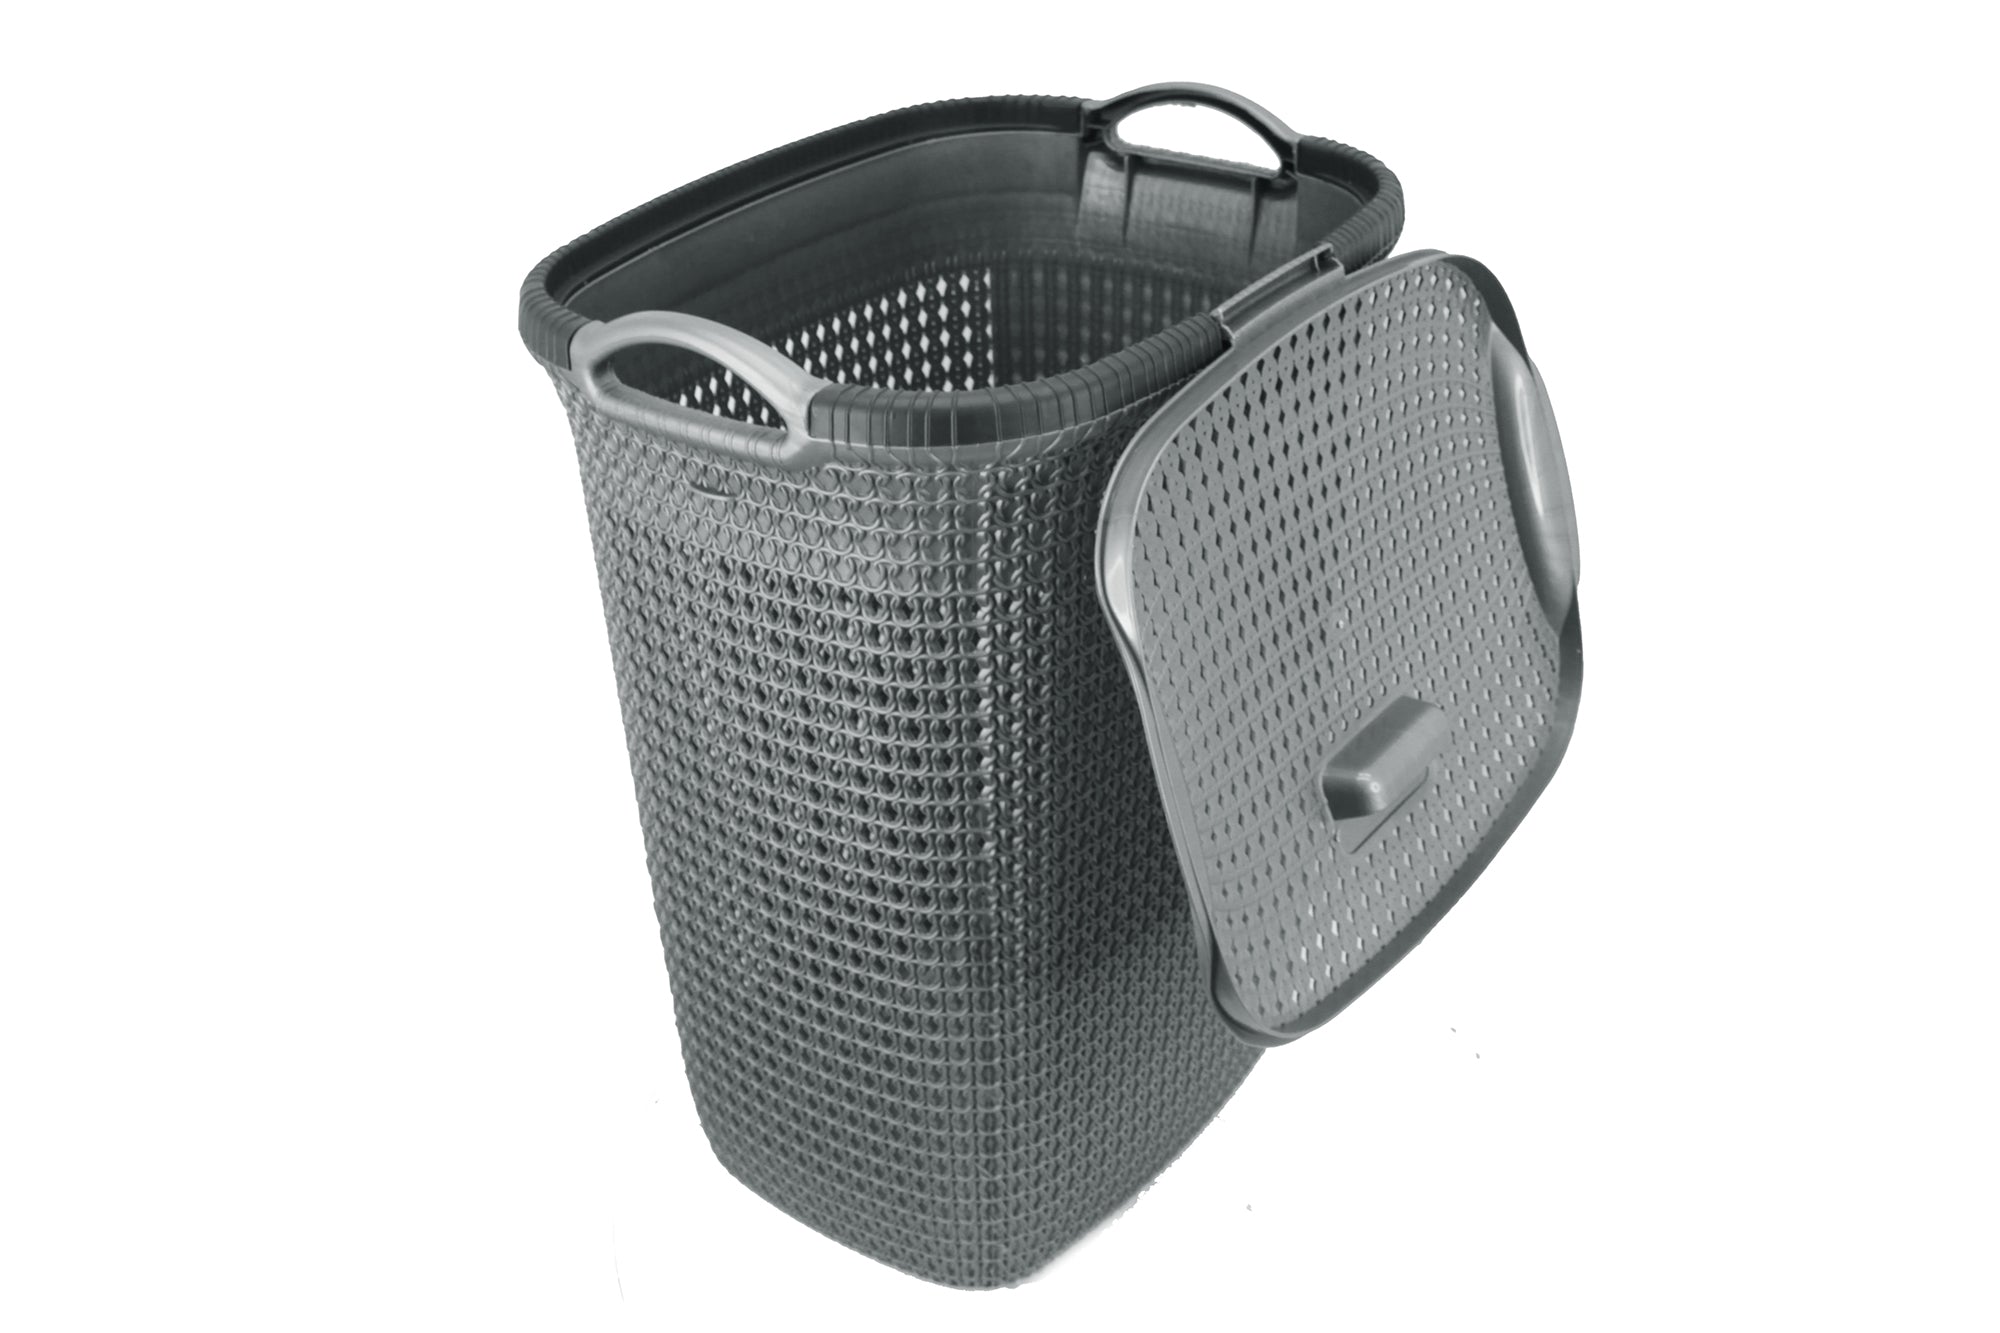 Two Tone PVC Mesh Weave Laundry Basket with Push-2-Lock Lid